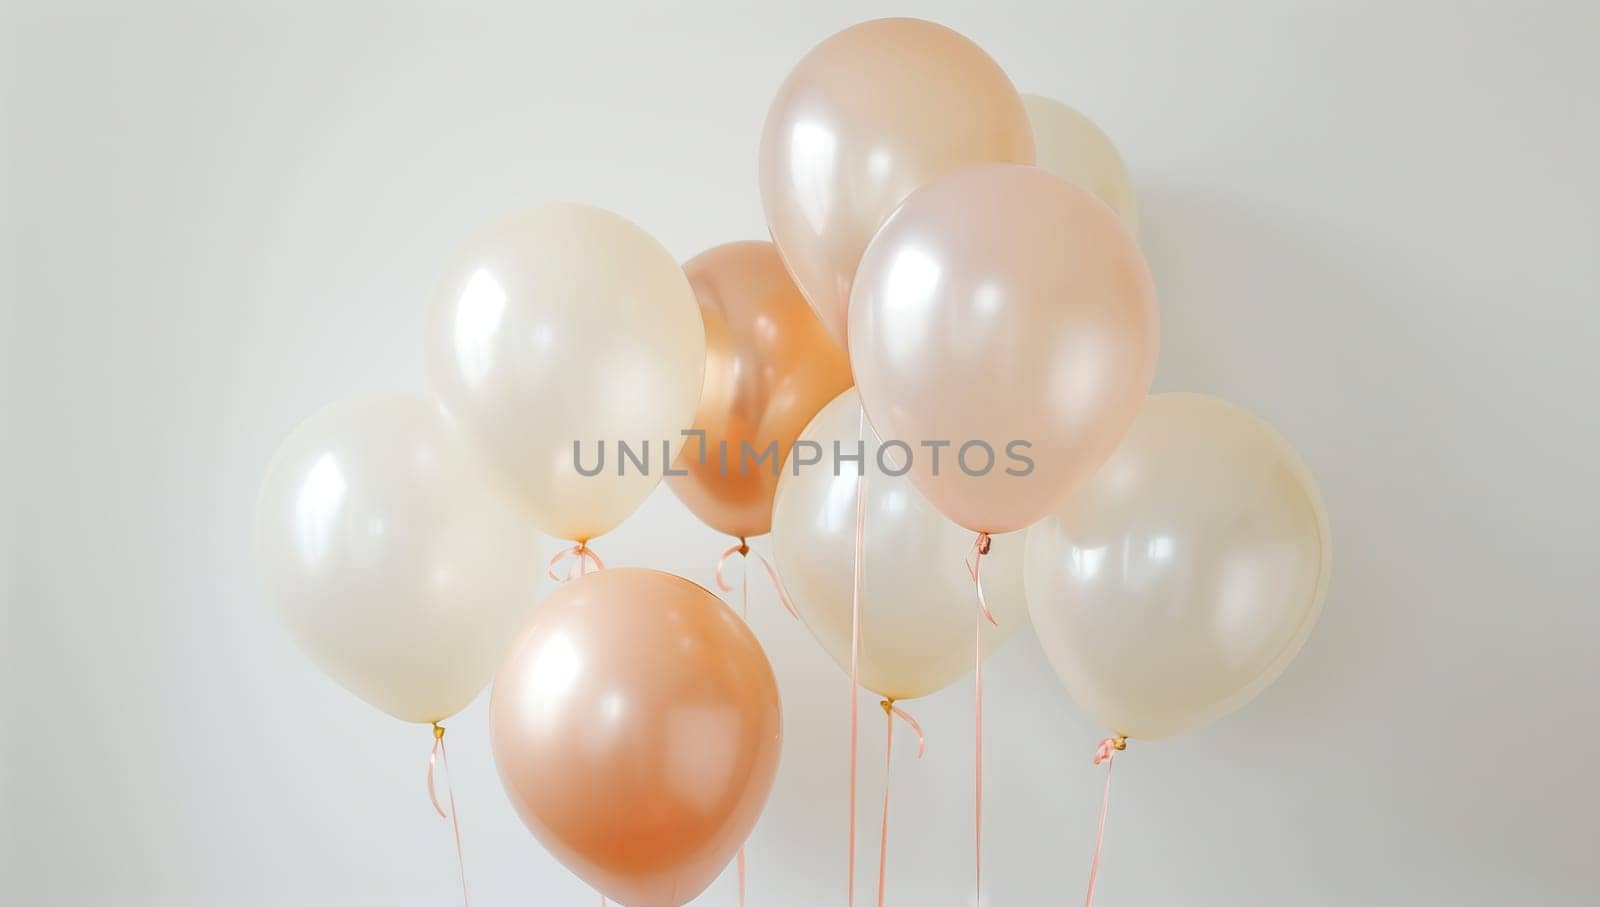 Balloons on a string against a white wall, perfect for events and parties by richwolf